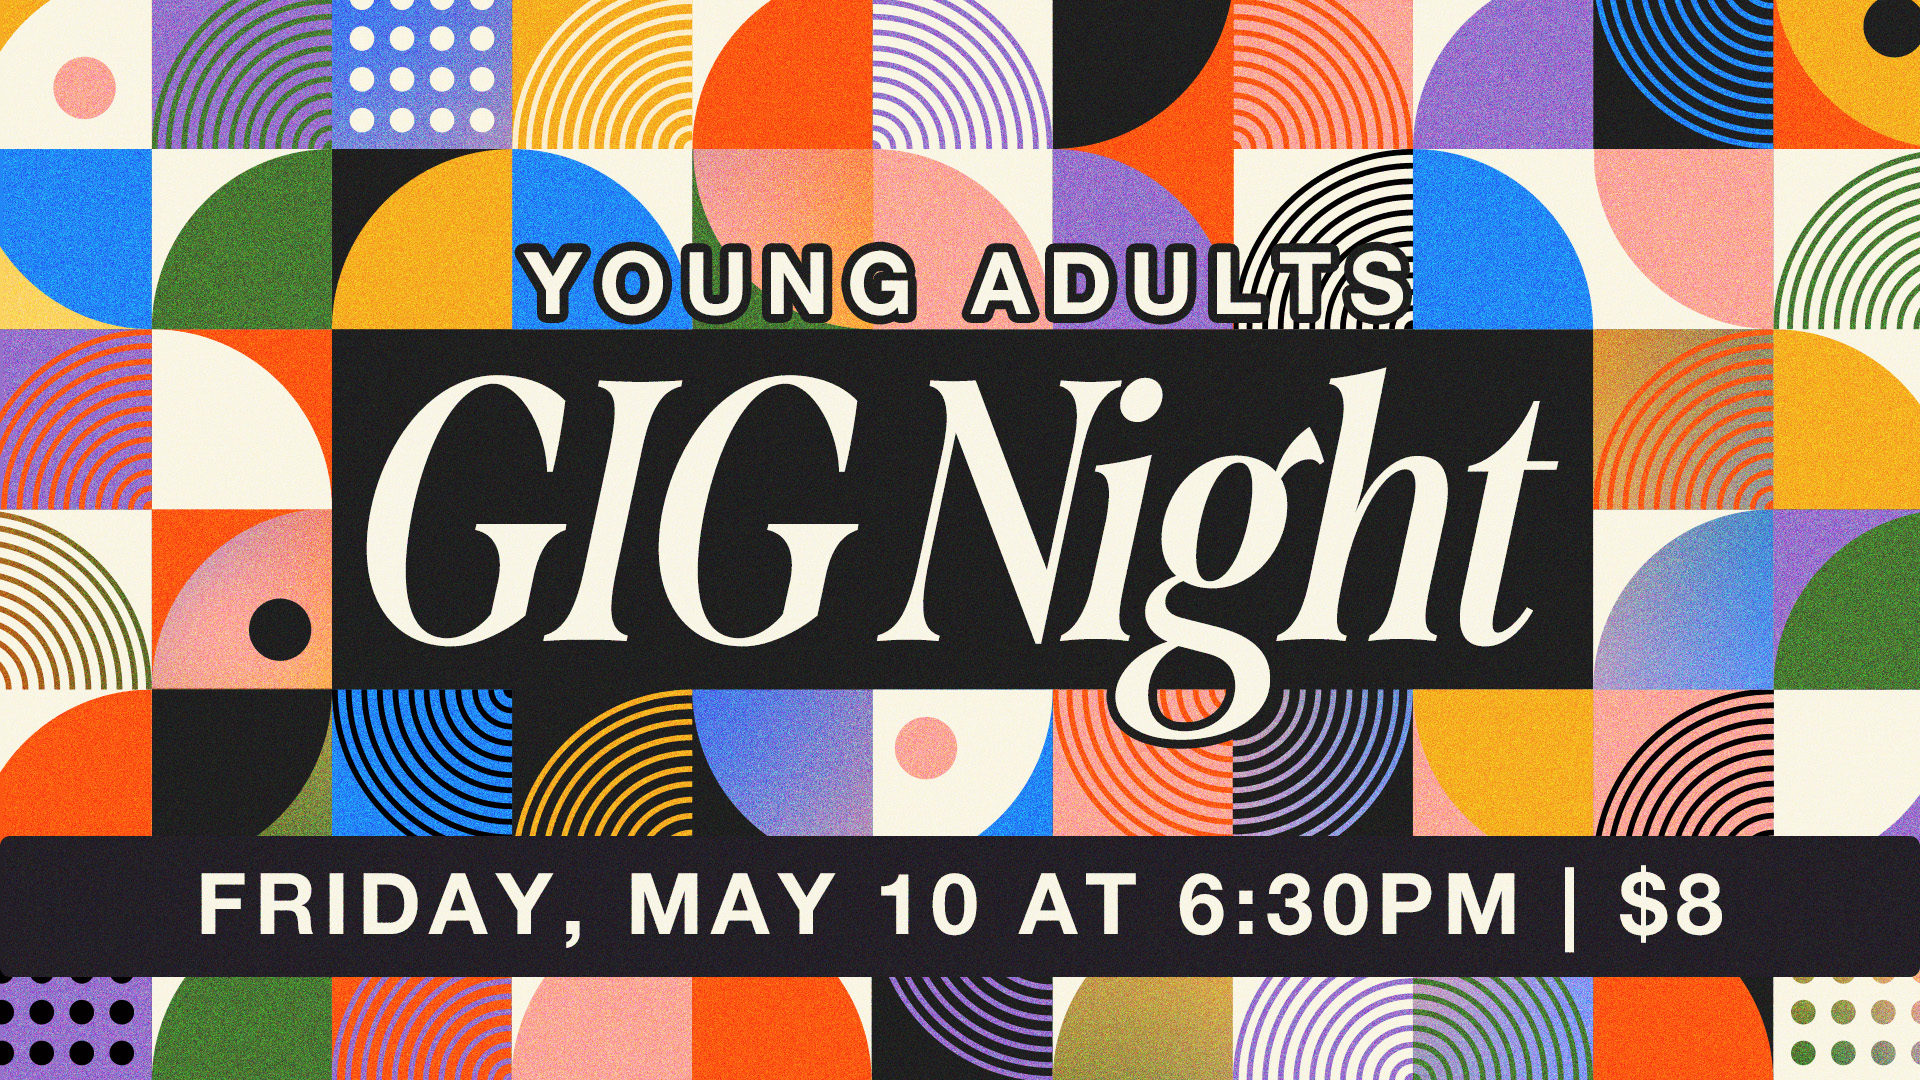 Young Adults GIG Night